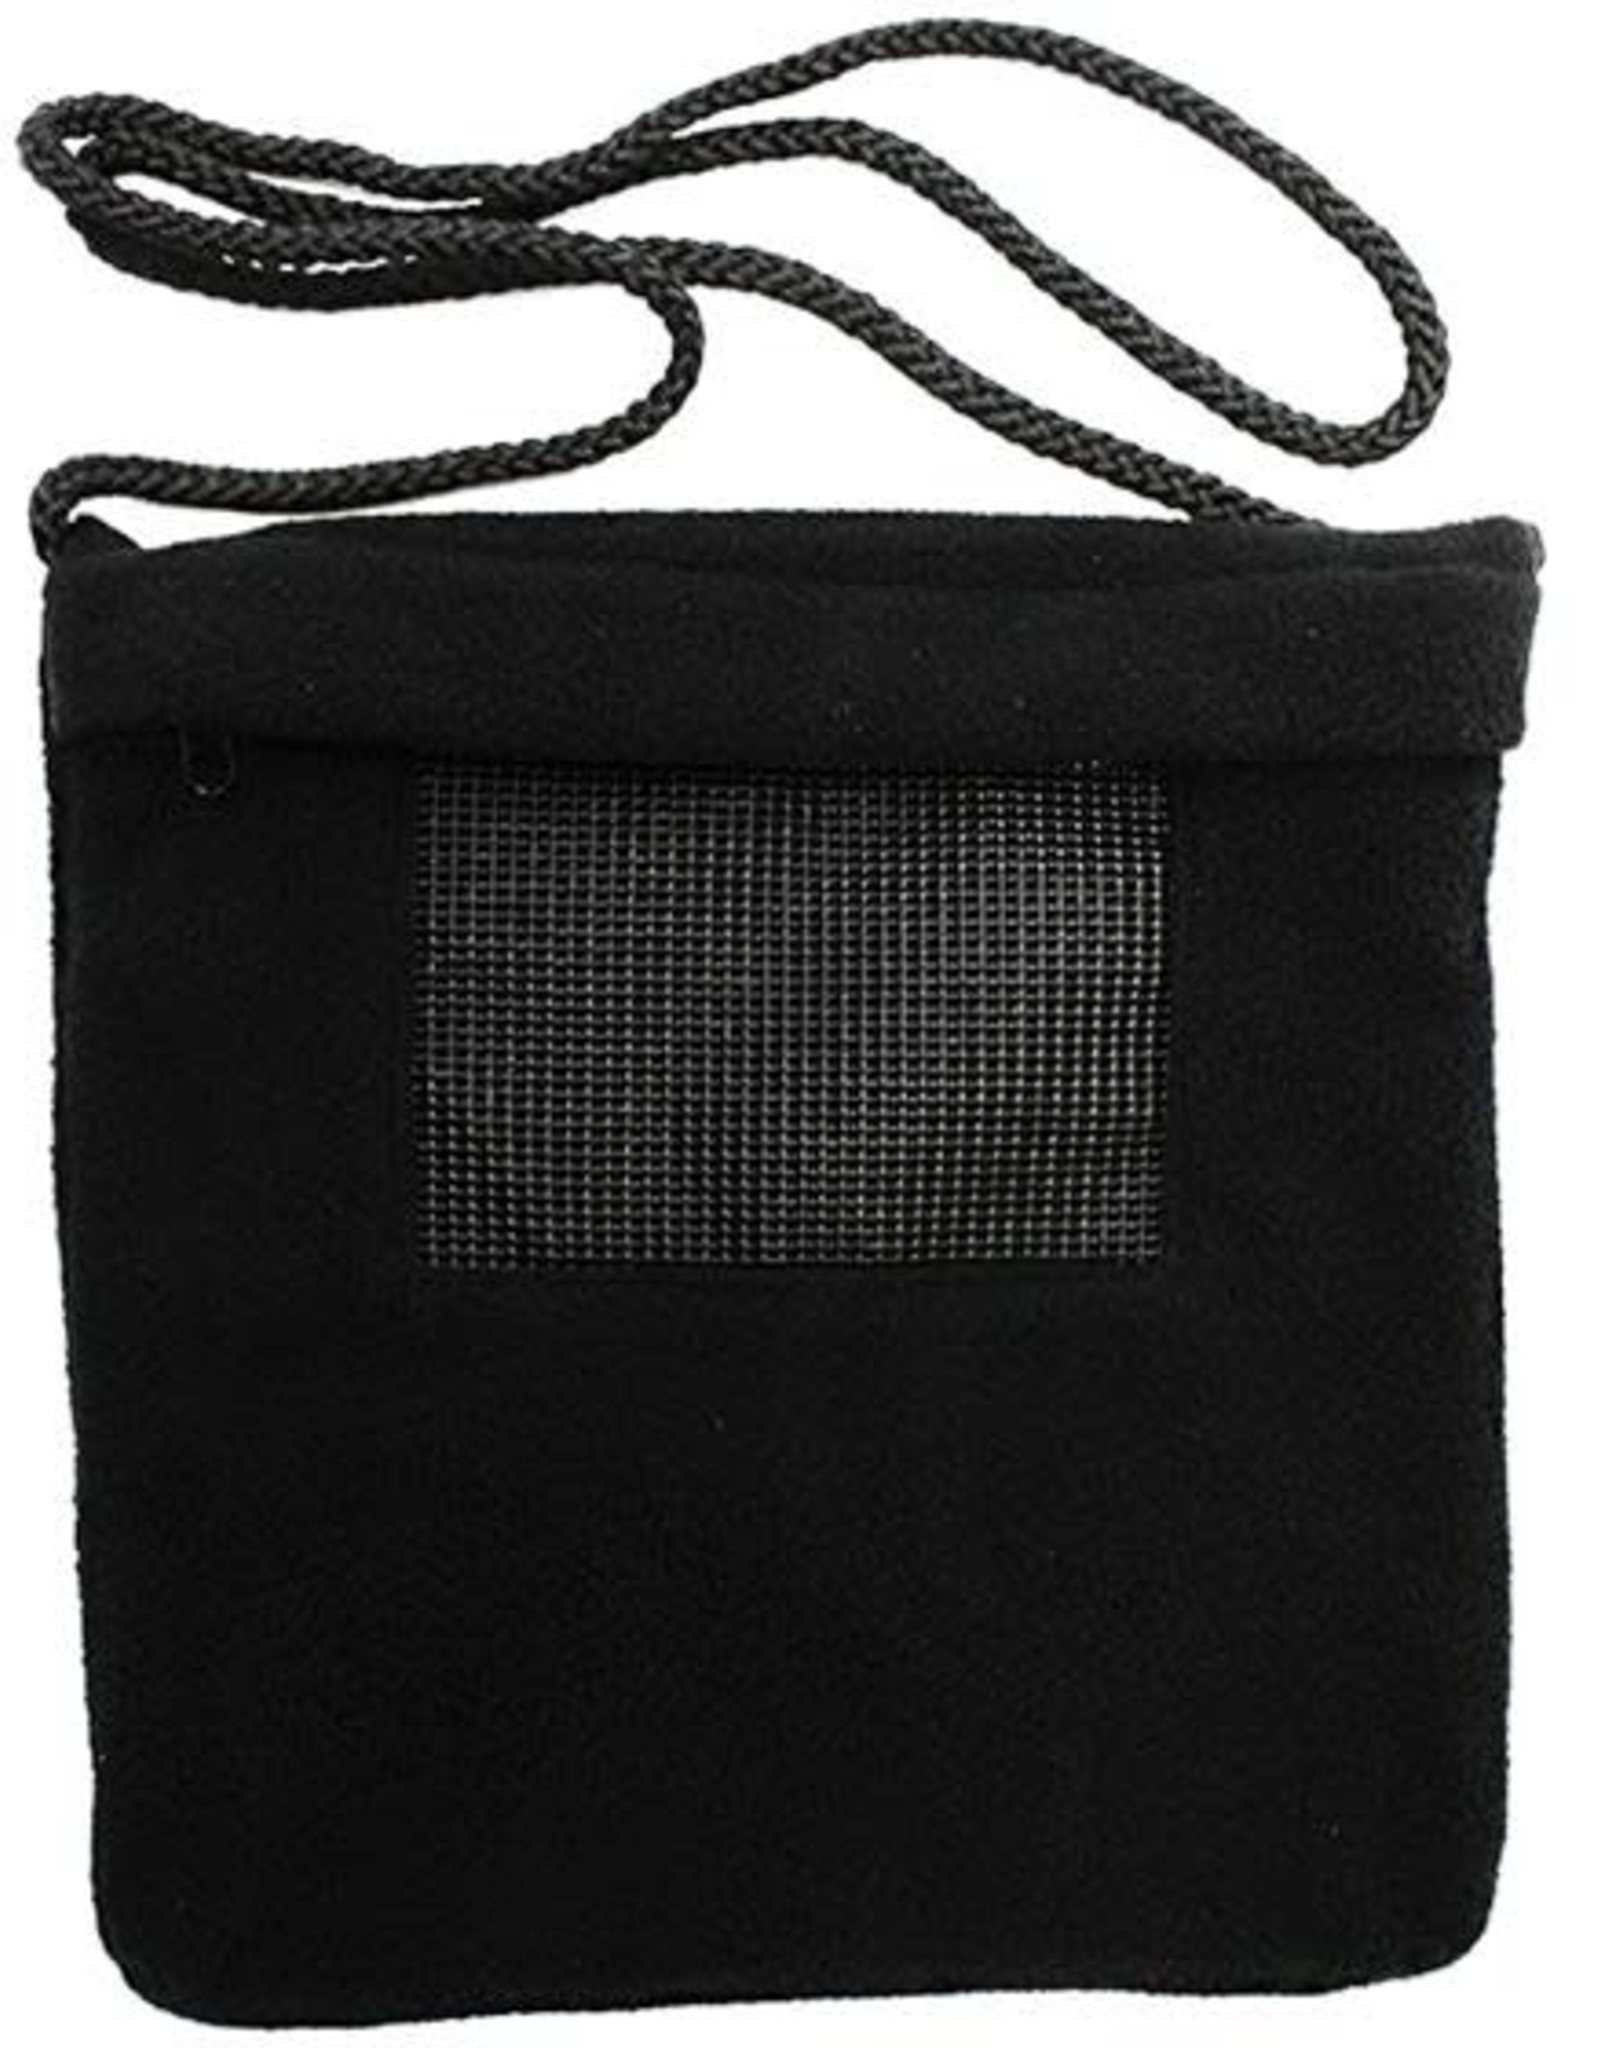 EXOTIC NUTRITION EN BONDING POUCH WITH WINDOW